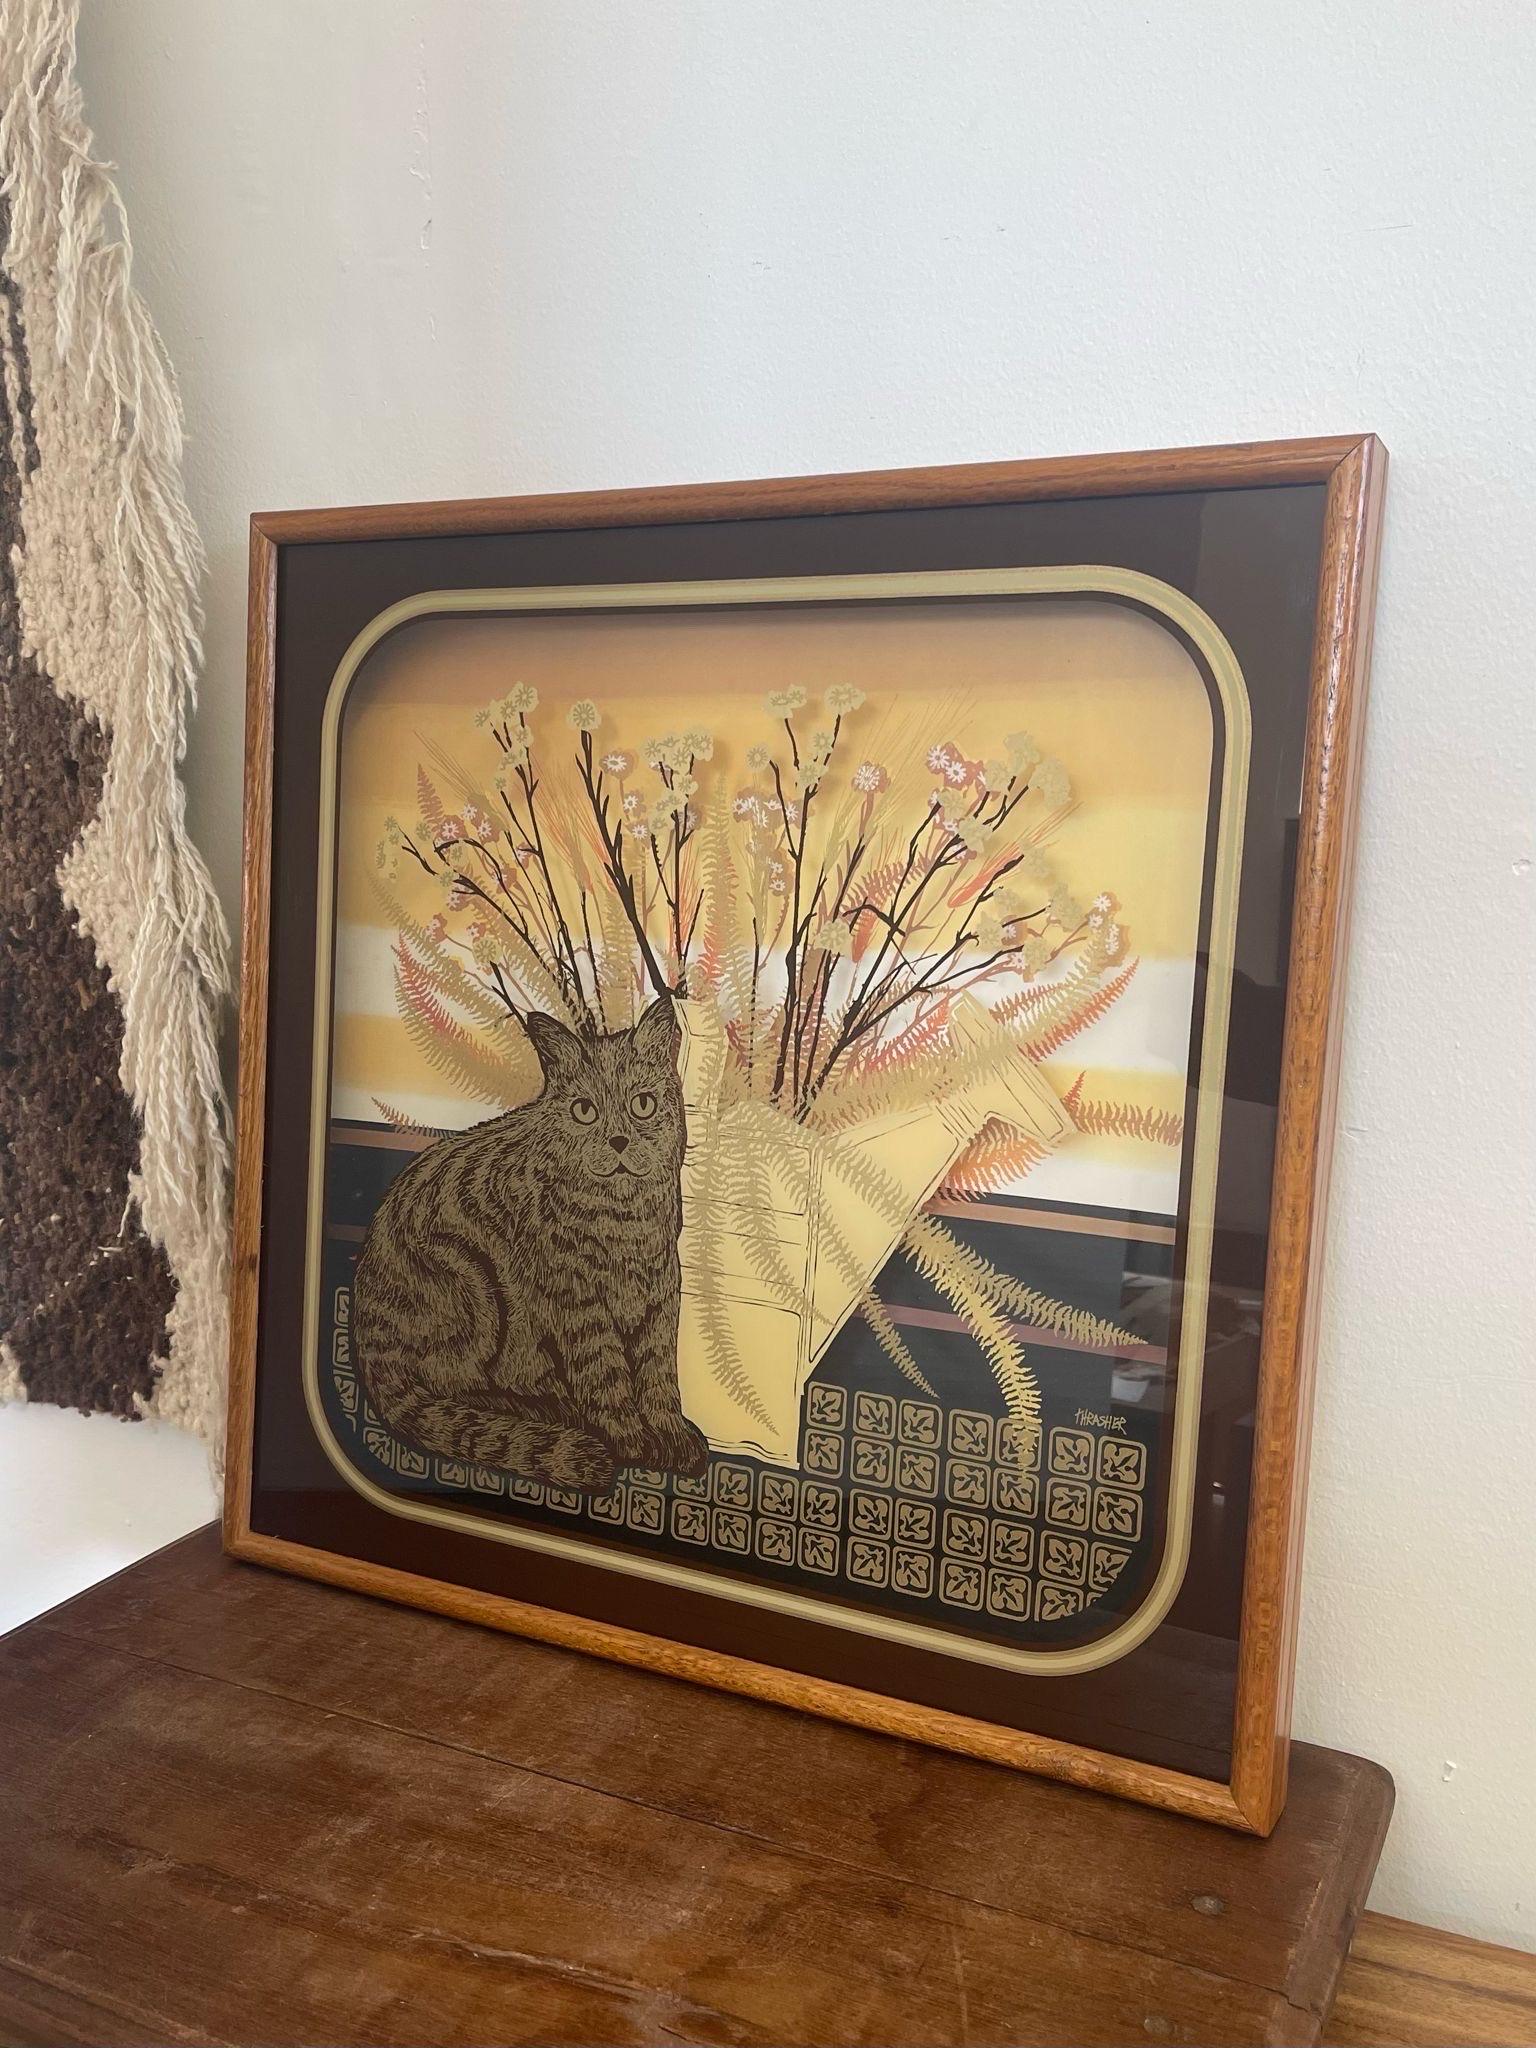 Made by California Artist Virgil Thrasher in the 1970s.
Brown mustard, and gold tones reflective of the period.A combination of reverse painting on glass, coordinated with a recessed scenic background gives a Contemporary Mid Century Style. Vintage